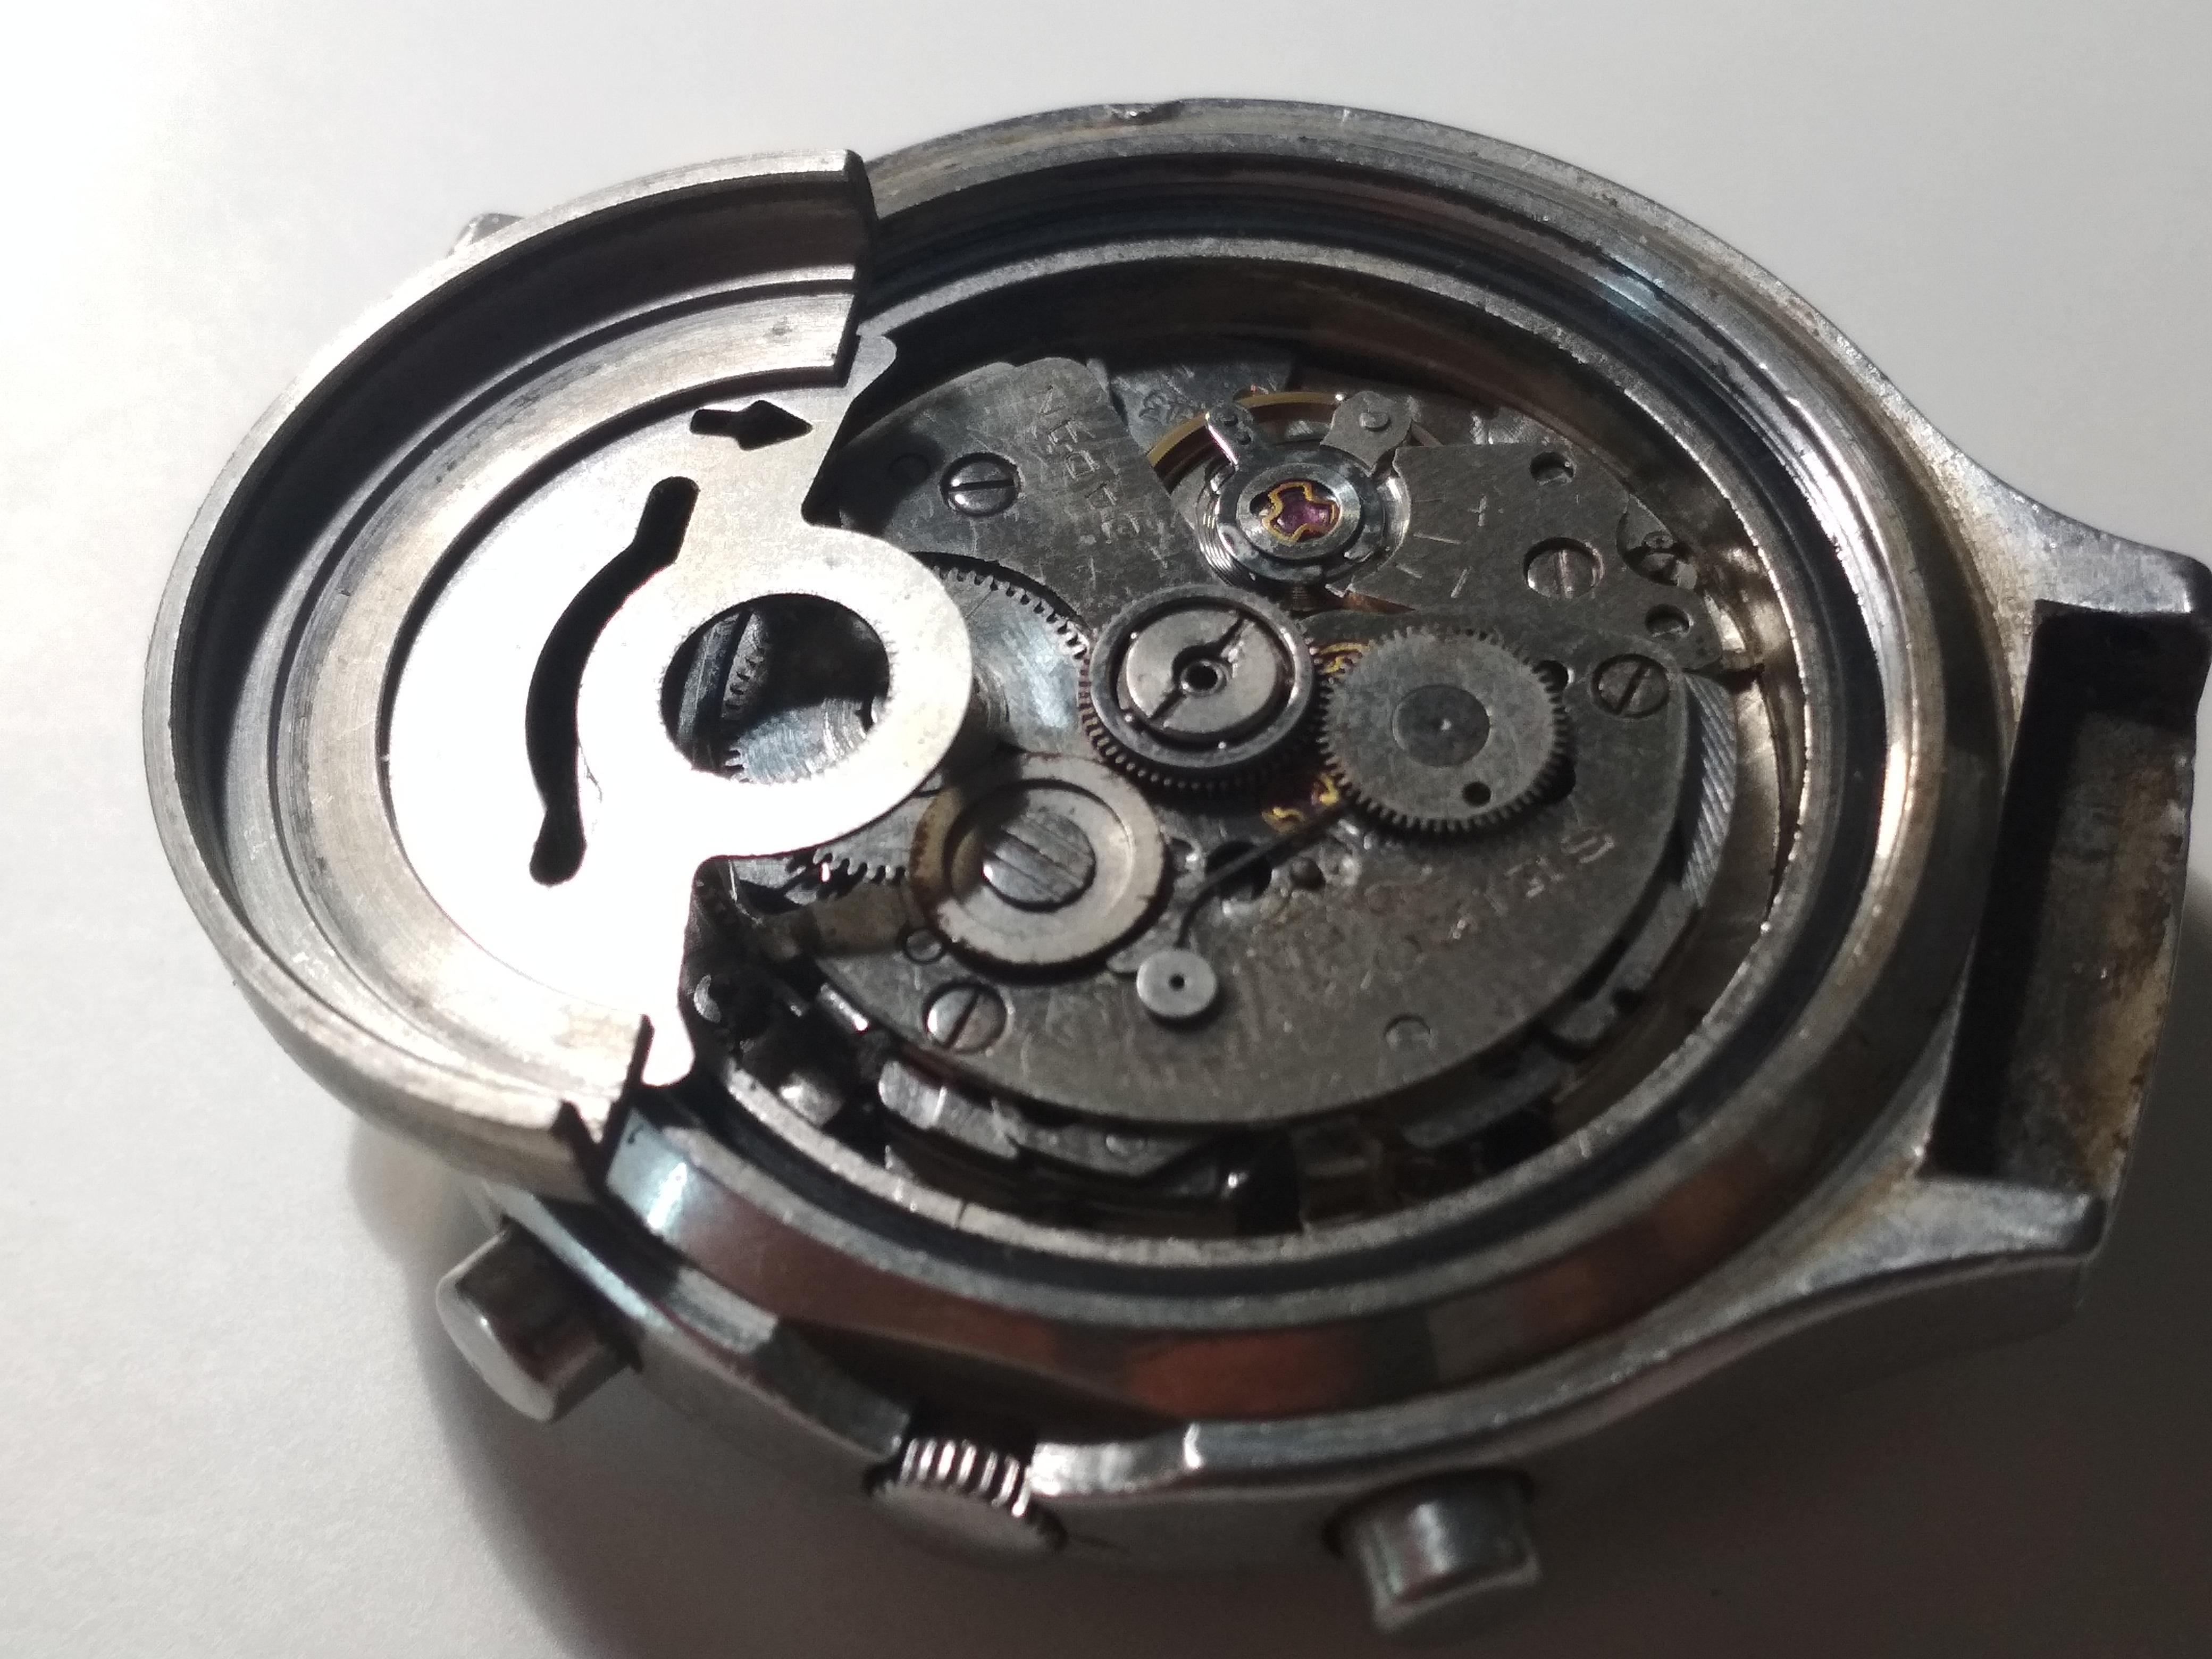 Seiko 7015-8000 restoration project - Your Walkthroughs and Techniques -  Watch Repair Talk